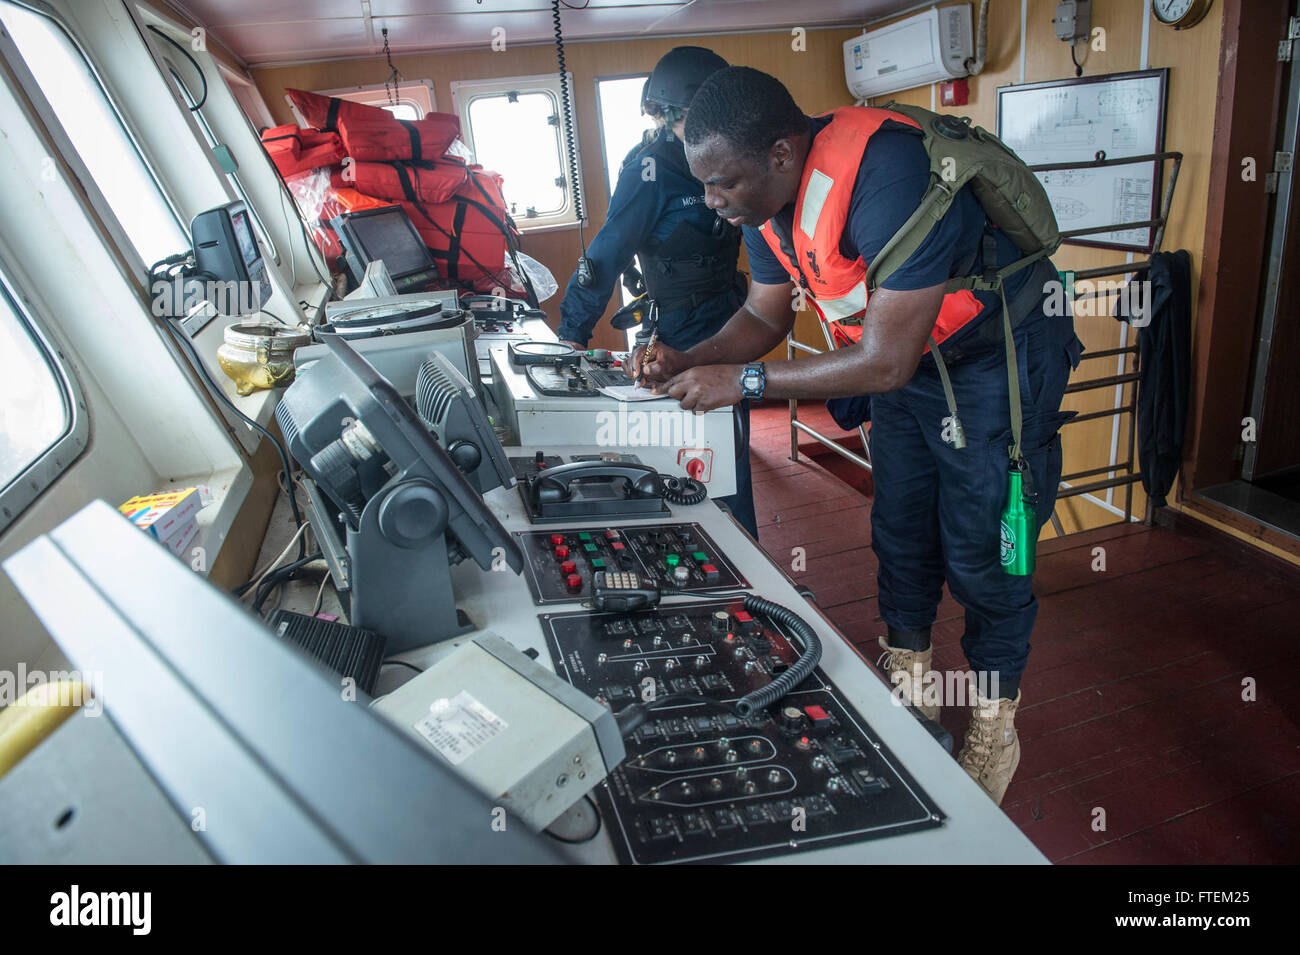 ATLANTIC OCEAN (Feb. 19, 2015) A Ghanaian police officer, in conjunction with the Military Sealift Command’s joint high-speed vessel USNS Spearhead (JHSV 1), inspects the fishing records aboard a fishing vessel during Africa Maritime Law Enforcement Partnership operations Feb. 19, 2015. Spearhead is on a scheduled deployment to the U.S. 6th Fleet area of operations in support of the international collaborative capacity-building program Africa Partnership Station. Stock Photo